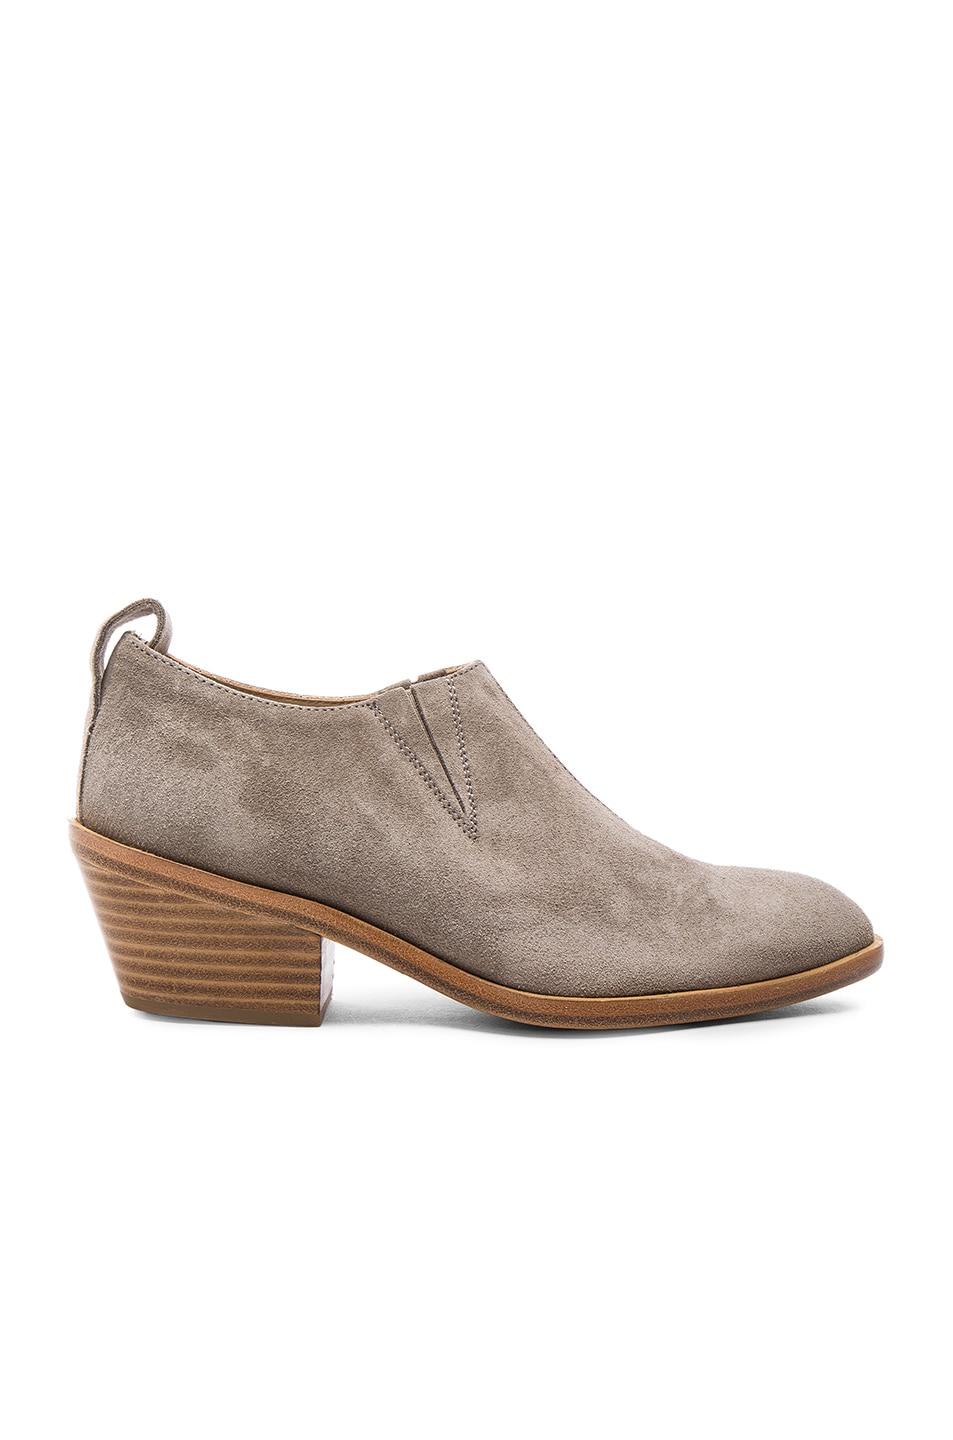 Image 1 of Rag & Bone Suede Thompson Boots in Warm Grey Suede